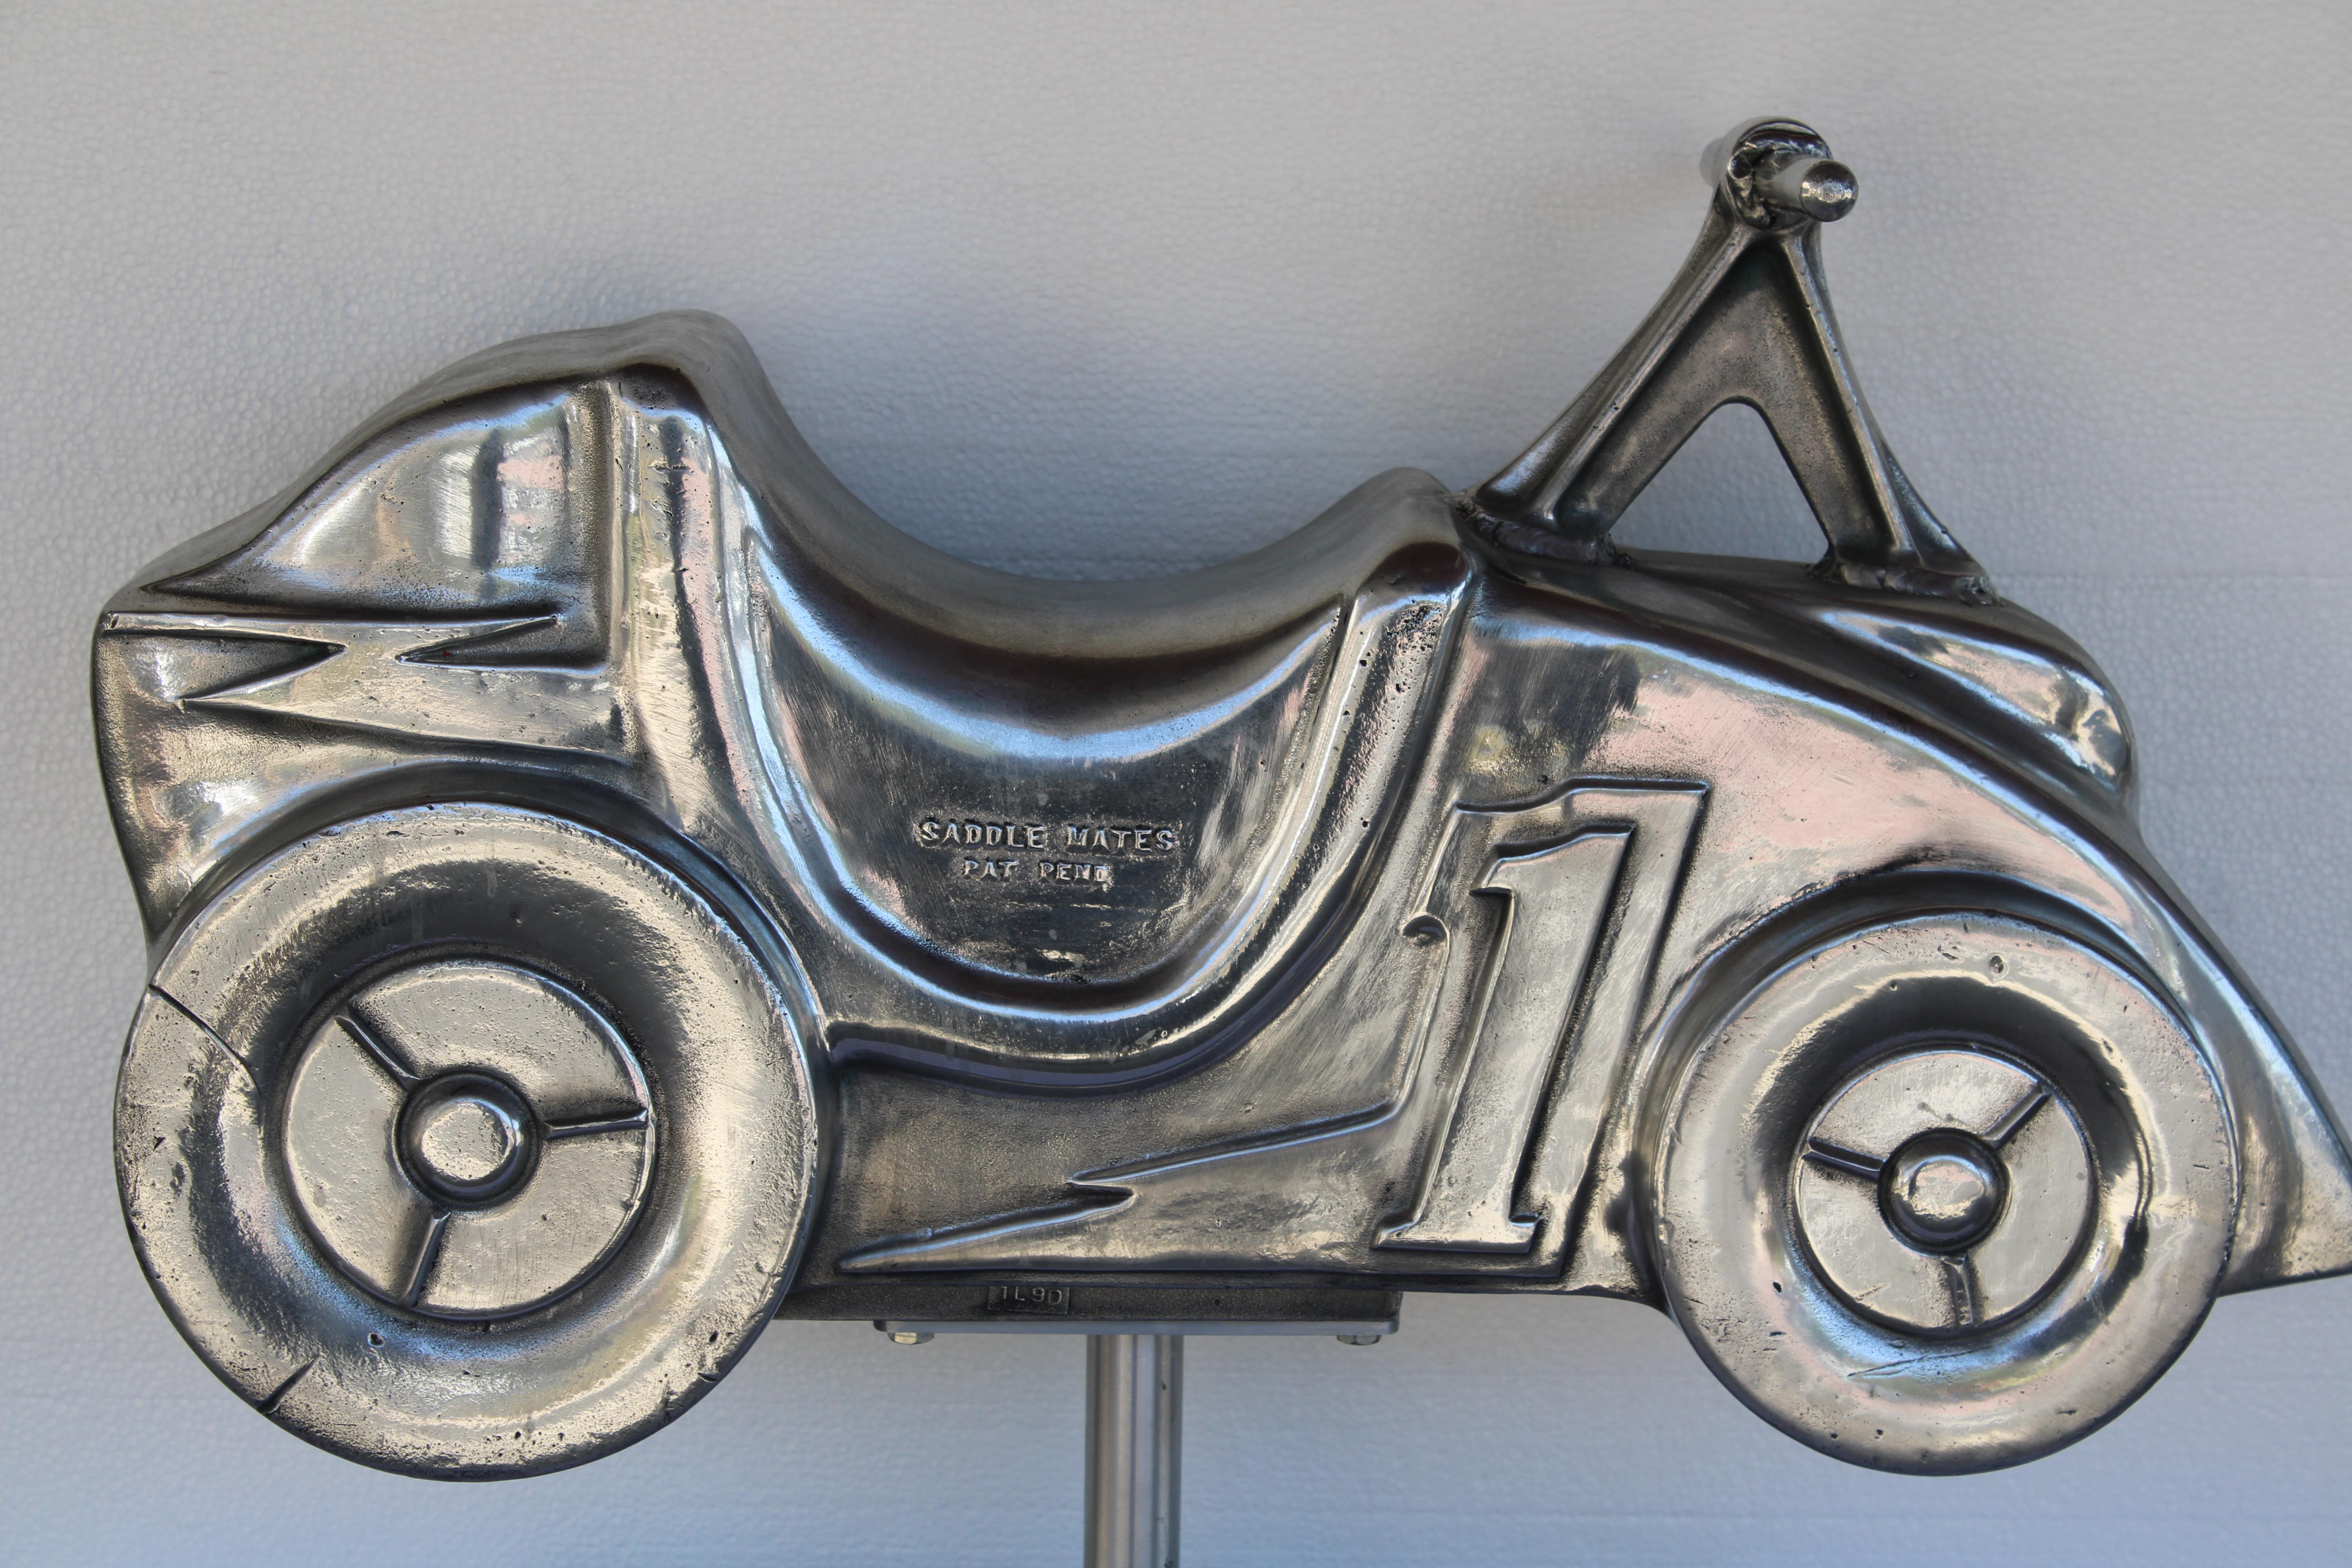 This aluminum motorcycle sculpture was originally a playground spring ride located throughout parks. Spring is not included. Motorcycle has been high polished and put on an aluminum stand.  It's more sculptural and part of Americana history. 